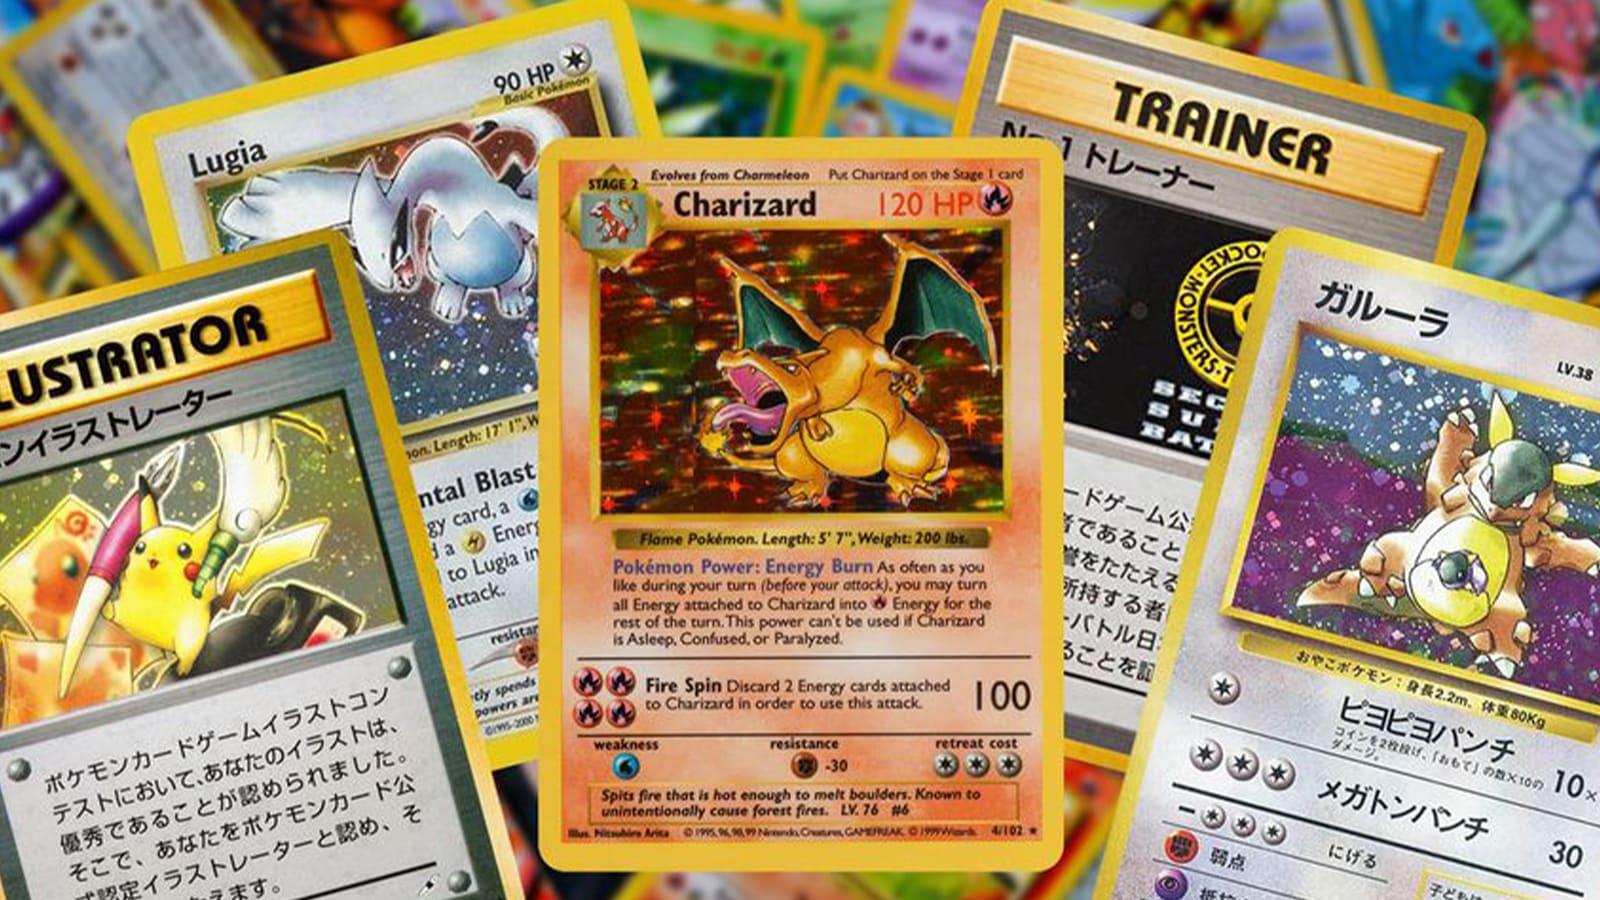 He Spent $57,000 in Covid Relief on a Pokémon Card. Now the U.S. Owns It. -  The New York Times